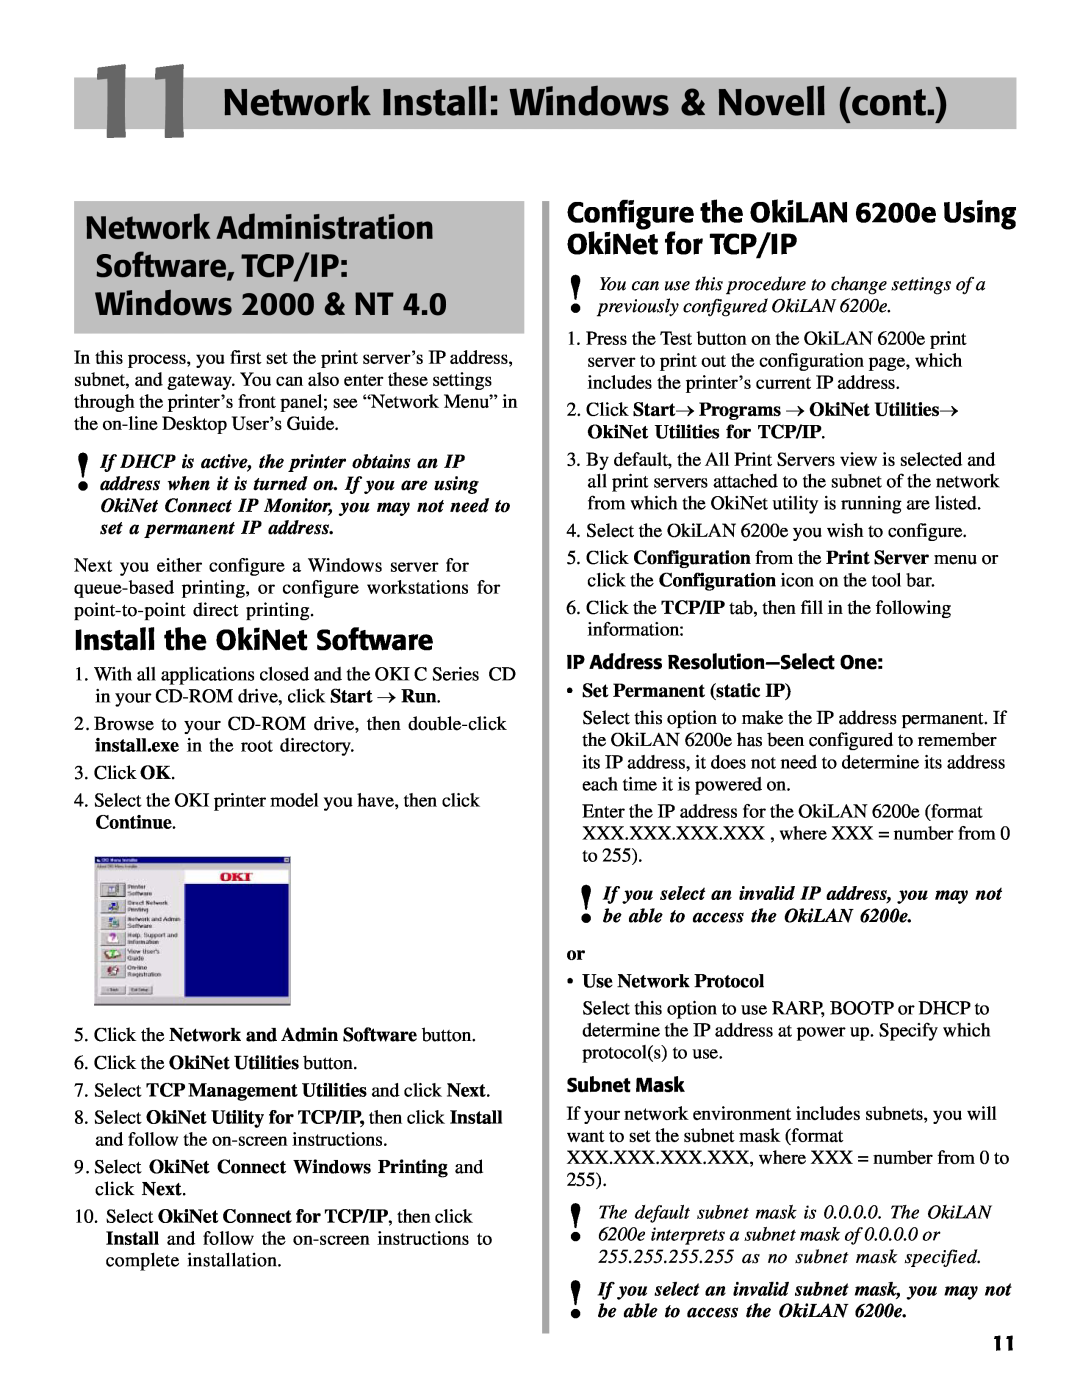 Oki C7000 Network Administration Software, TCP/IP Windows 2000 & NT, Install the OkiNet Software, Set Permanent static IP 